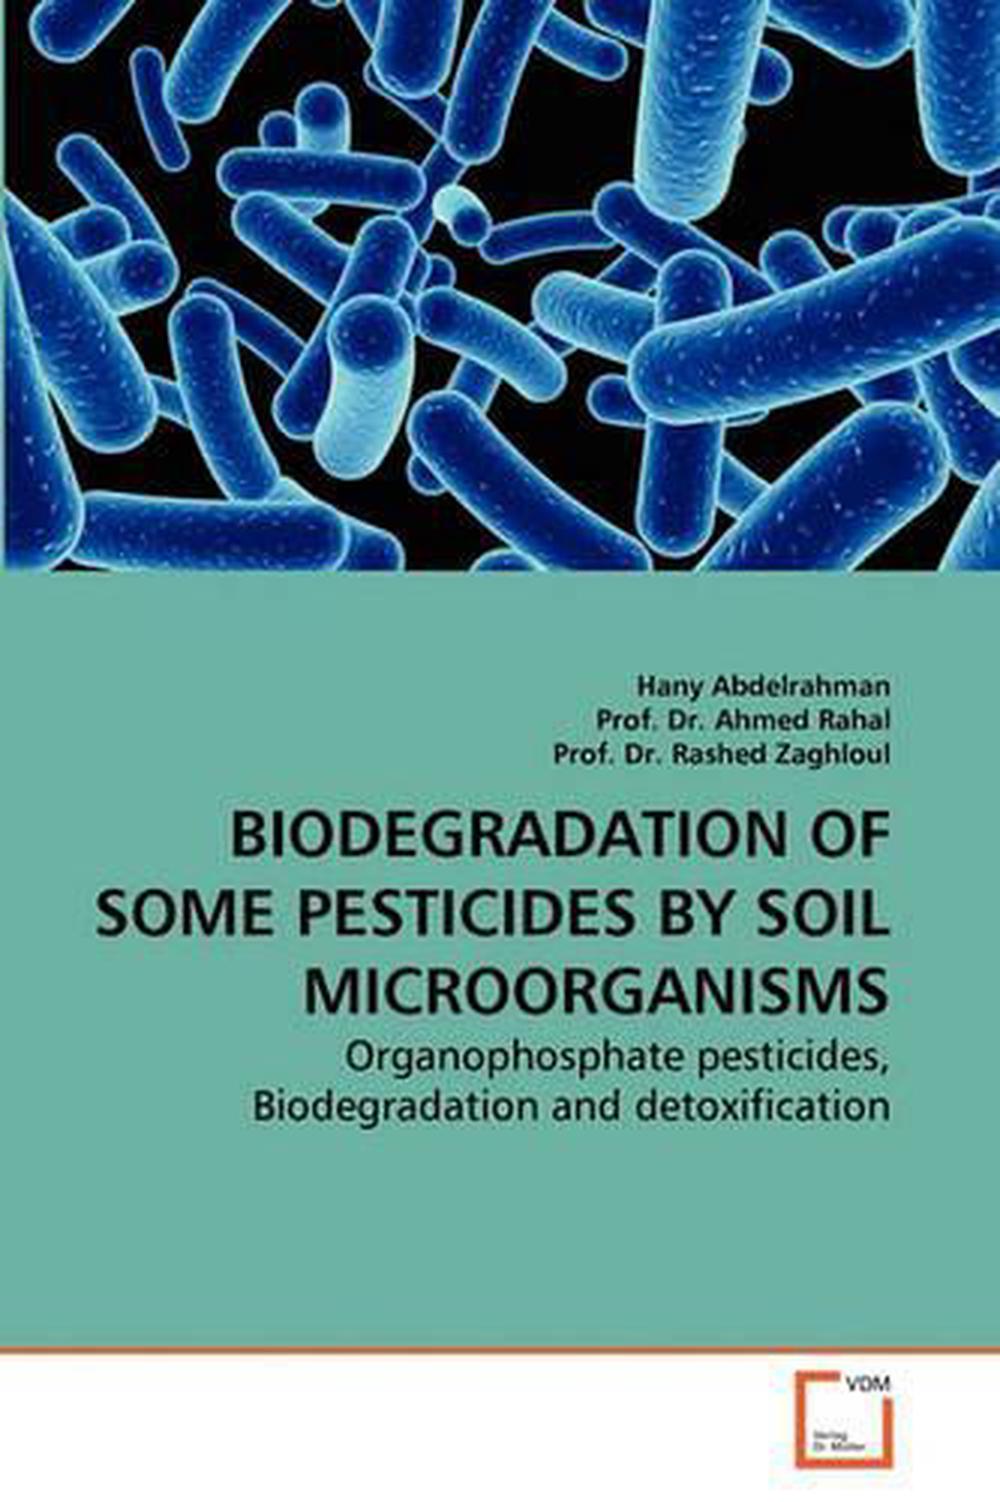 Biodegradation of Some Pesticides by Soil Microorganisms